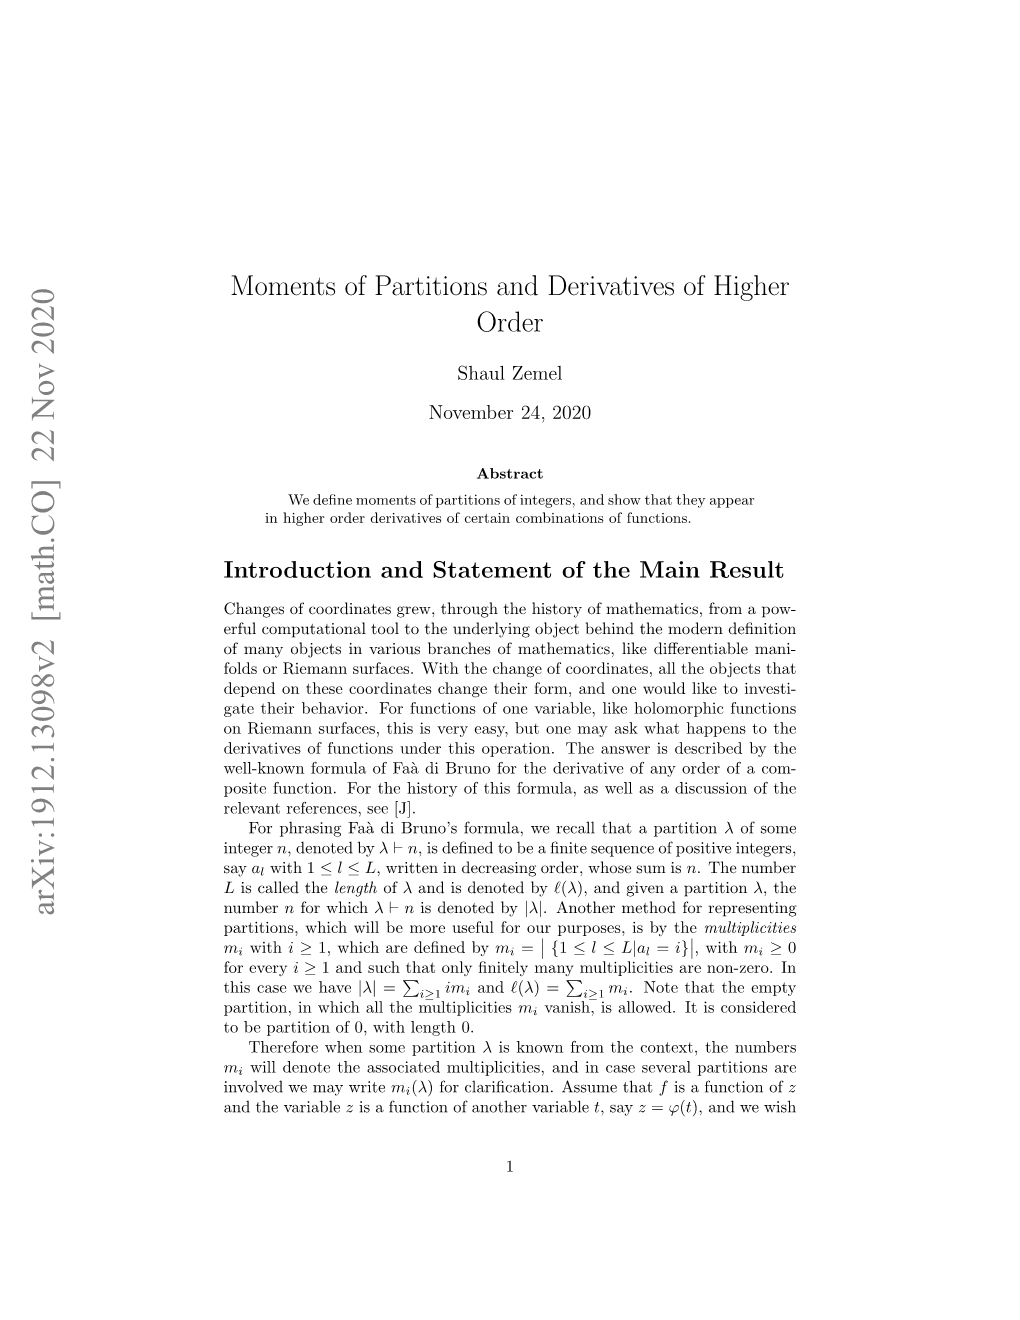 Moments of Partitions and Derivatives of Higher Order